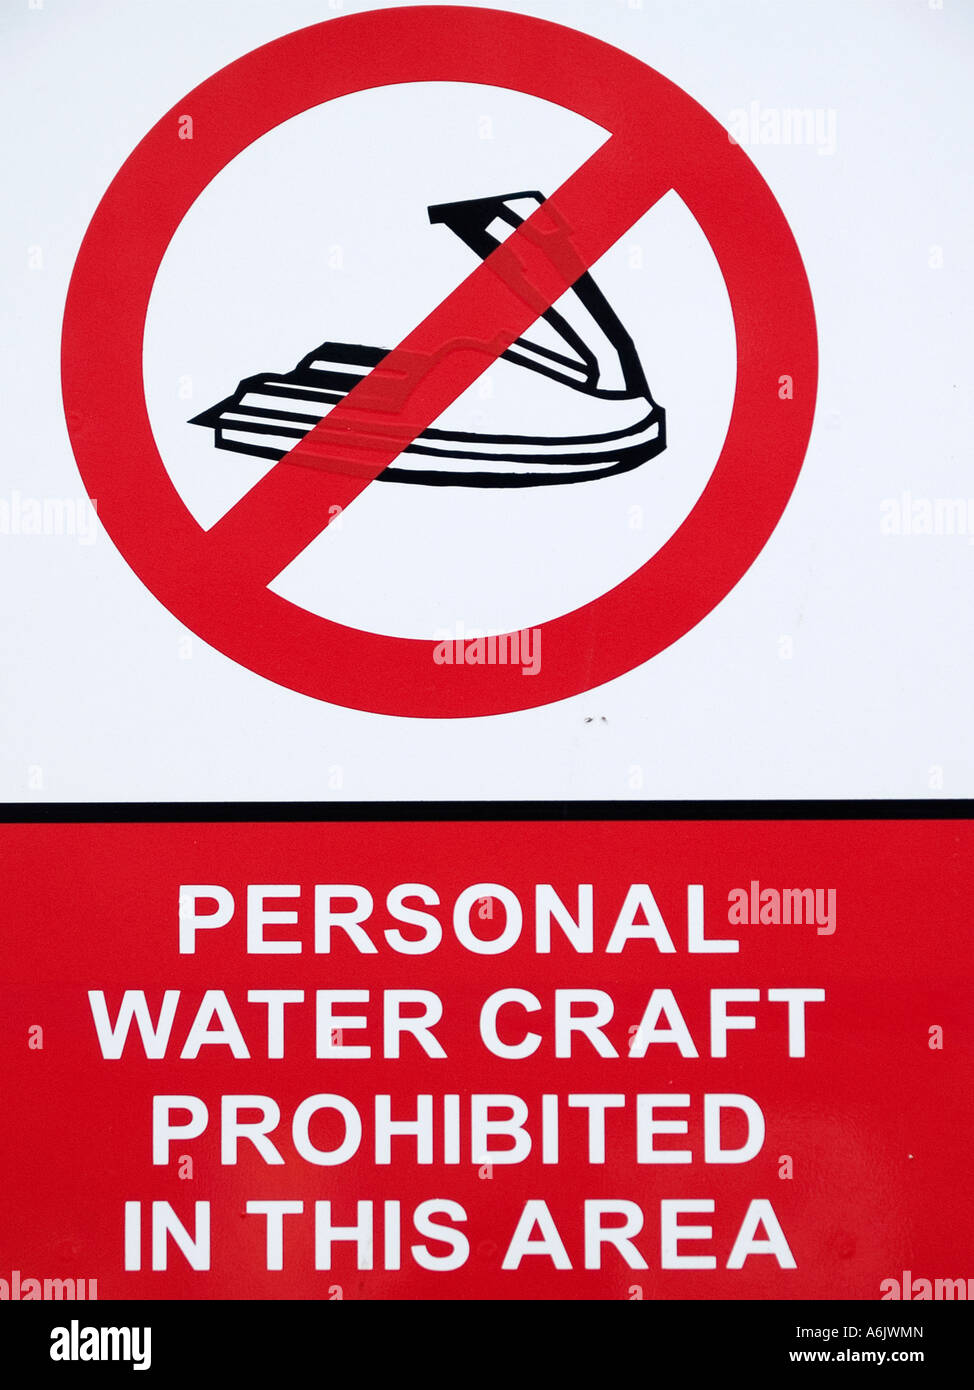 Personal watercraft prohibited in this area sign Stock Photo